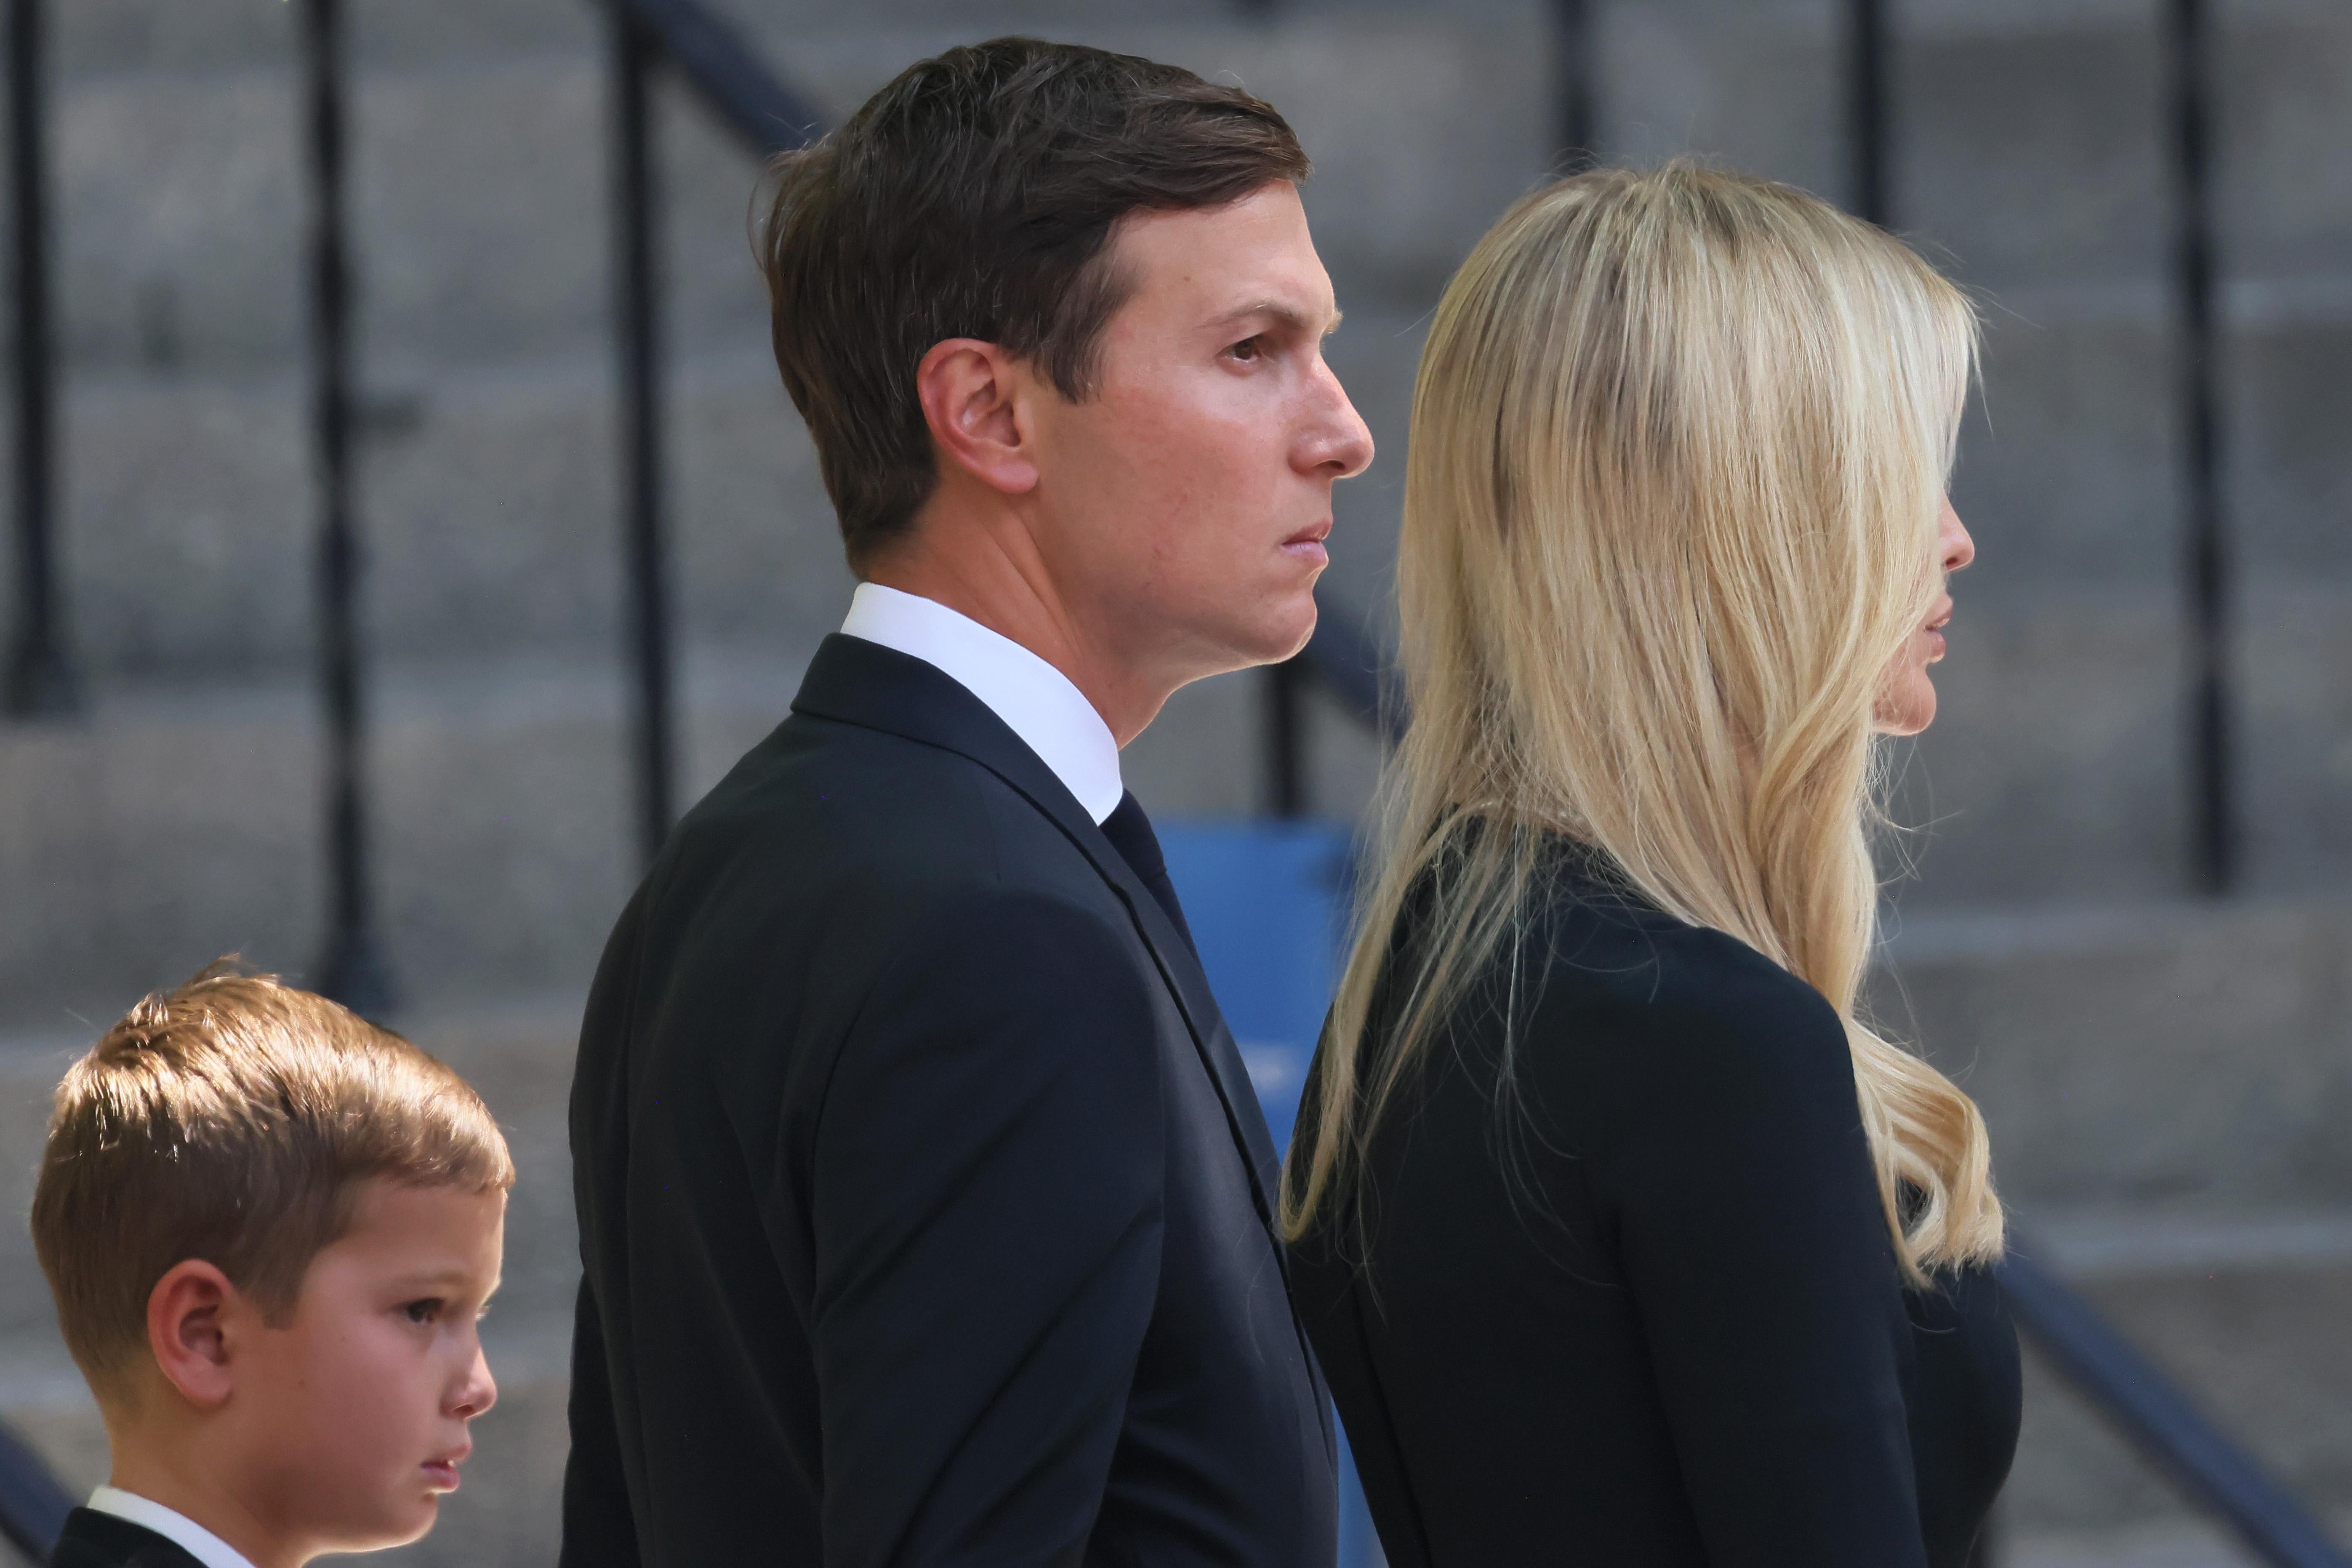 Kushner stares into the distance, standing by Ivanka.